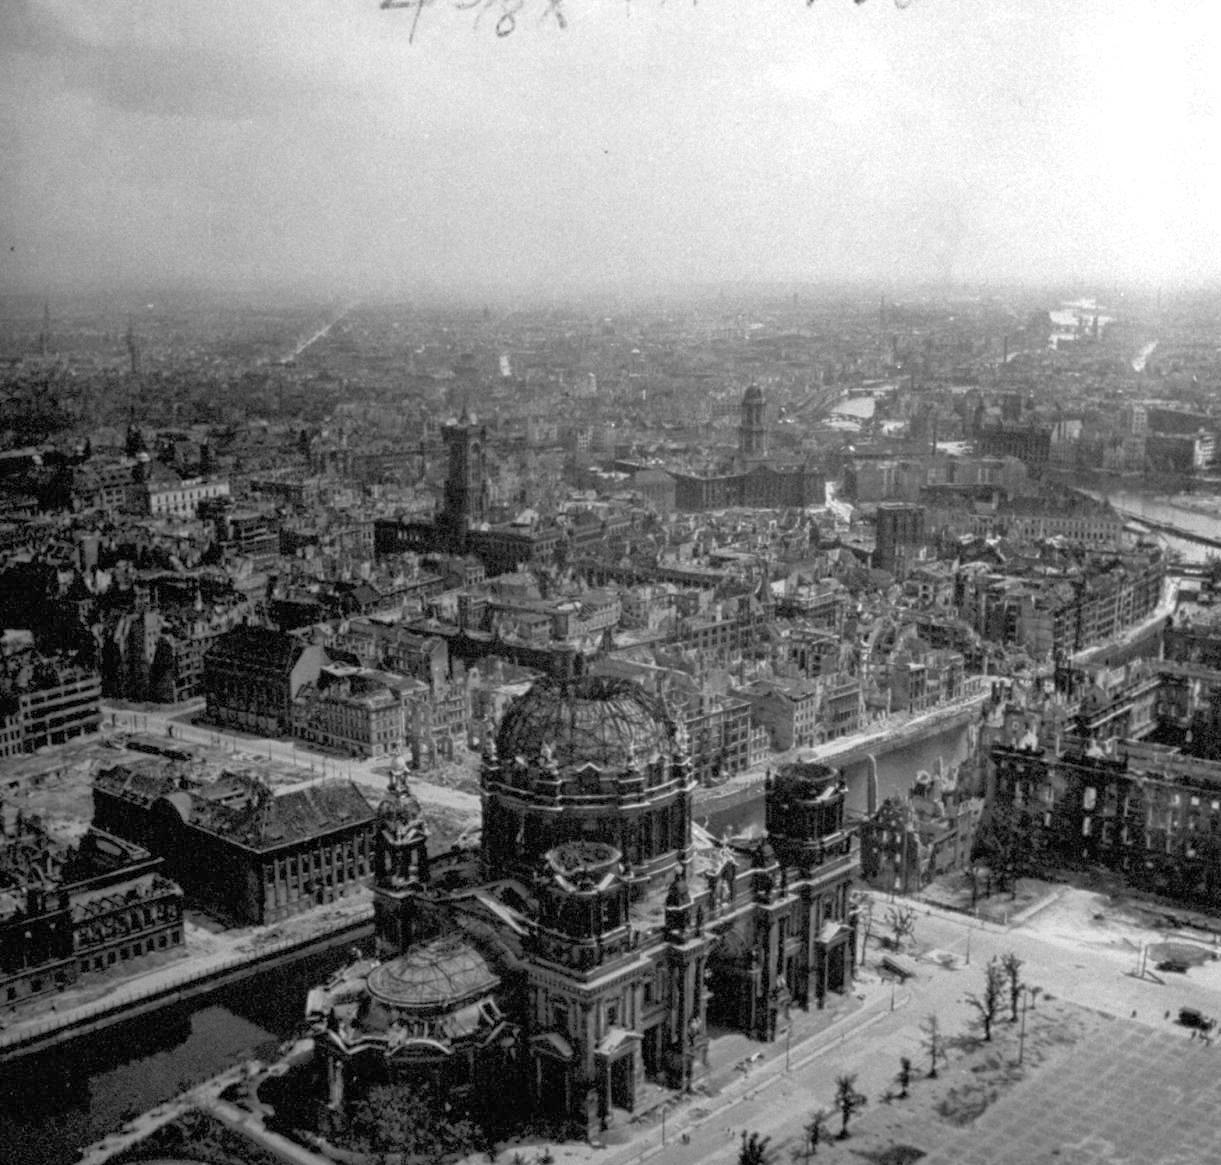 Statisticians calculated that for every inhabitant of Berlin there were nearly 30 cubic meters of rubble.